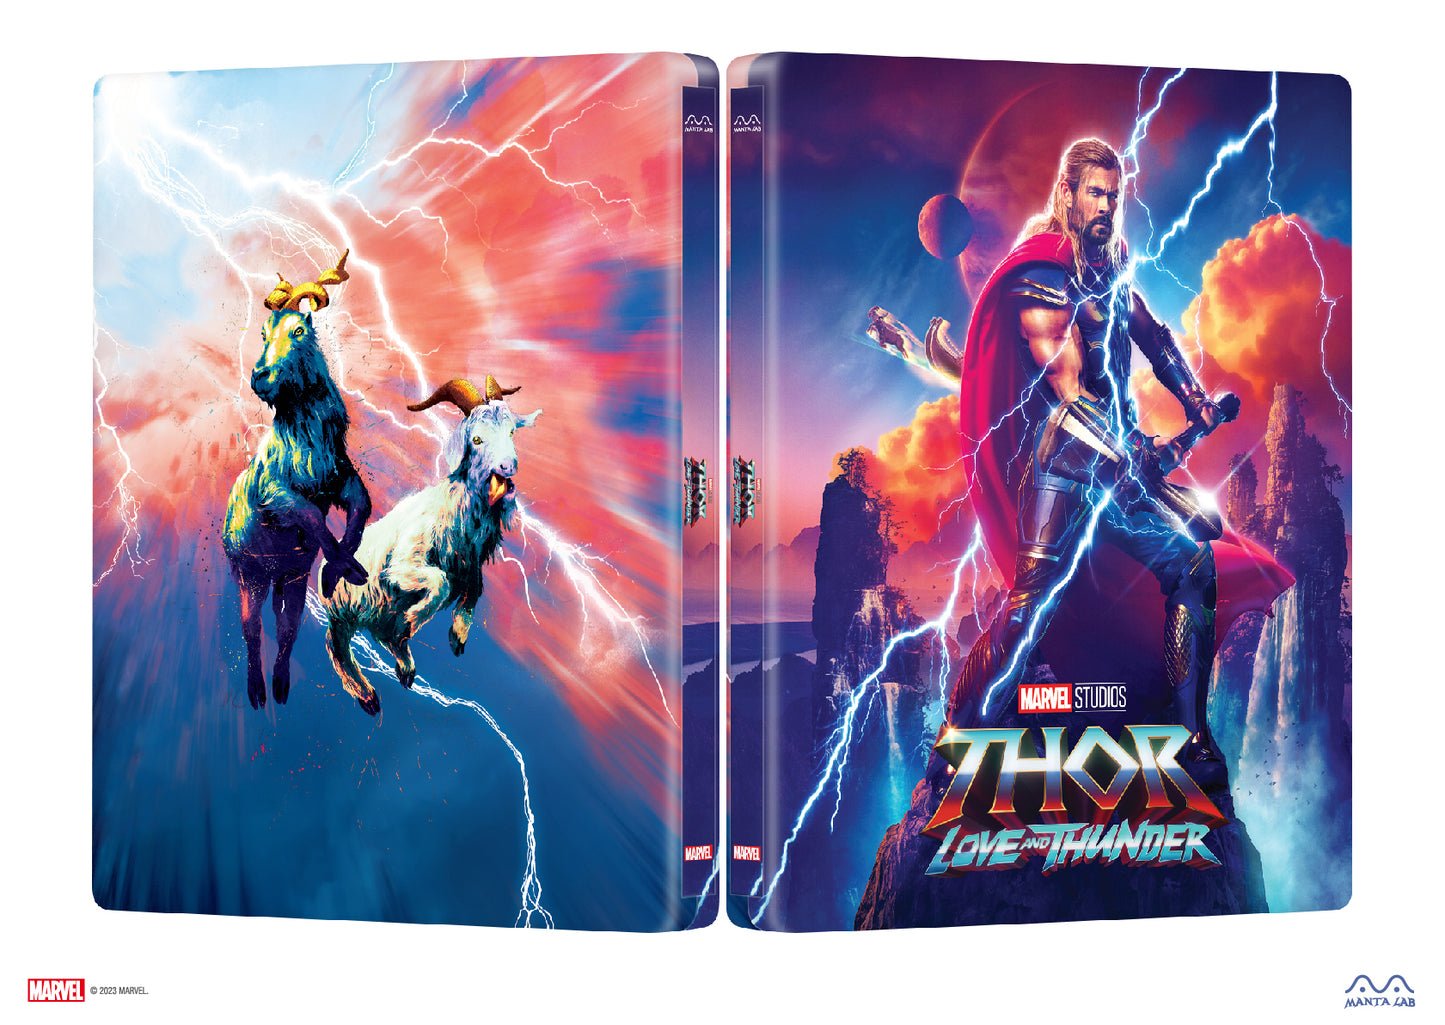 Thor: Love and Thunder Steelbook (Discless) Steelbook Manta Lab Exclusive MCP#-005 HDN GB Pre-Order One Click